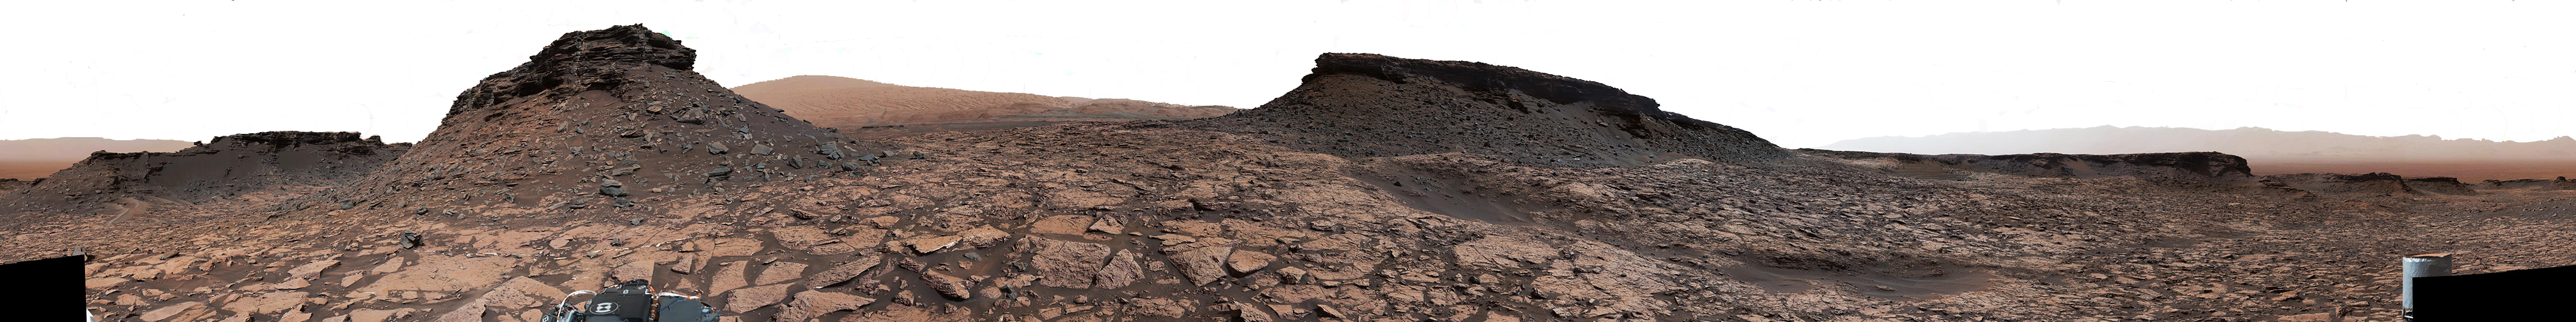 MSL Curiosity at end of Murray Buttes in Gale Crater